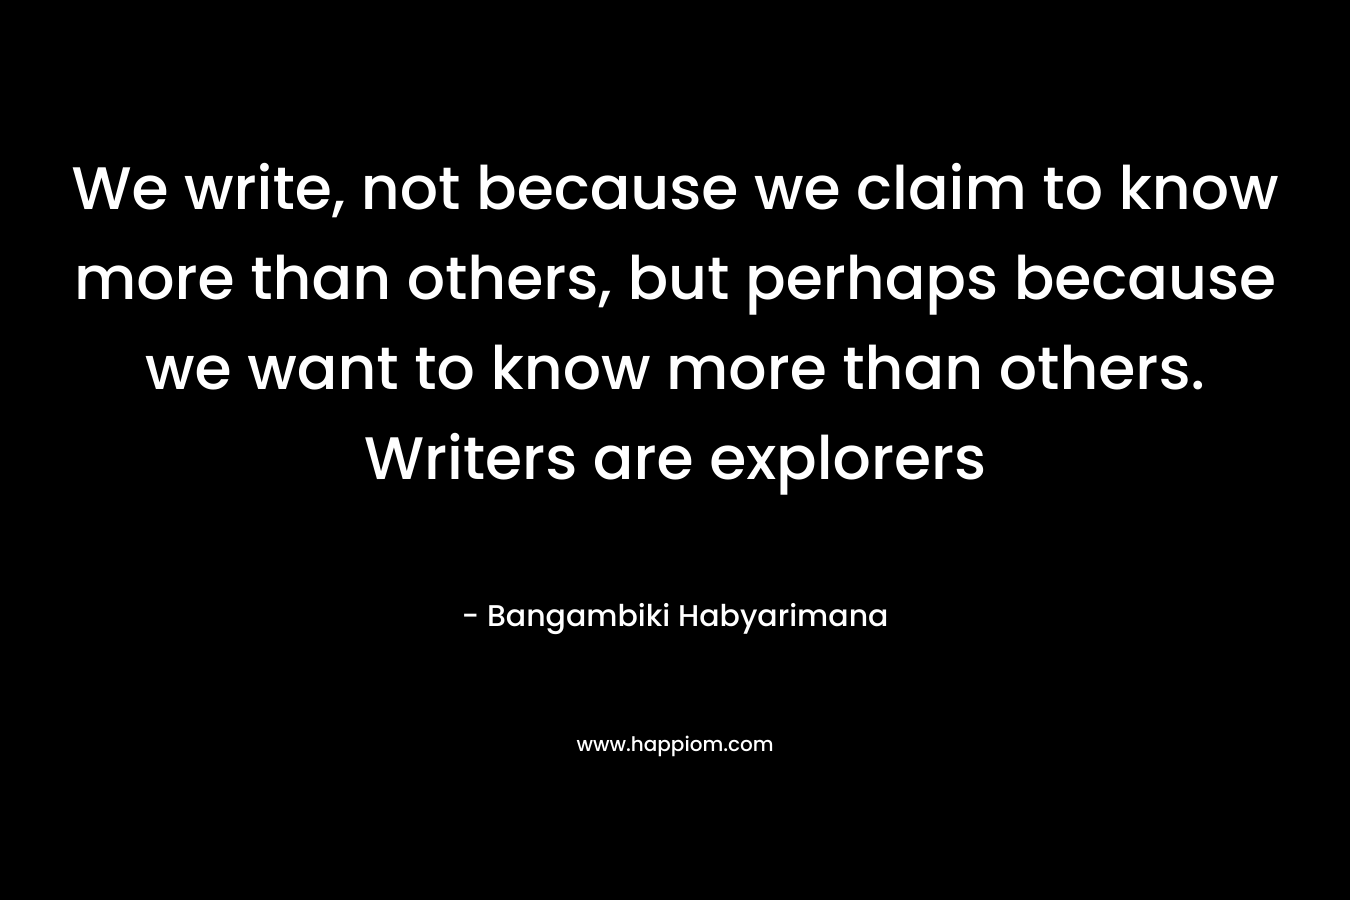 We write, not because we claim to know more than others, but perhaps because we want to know more than others. Writers are explorers – Bangambiki Habyarimana